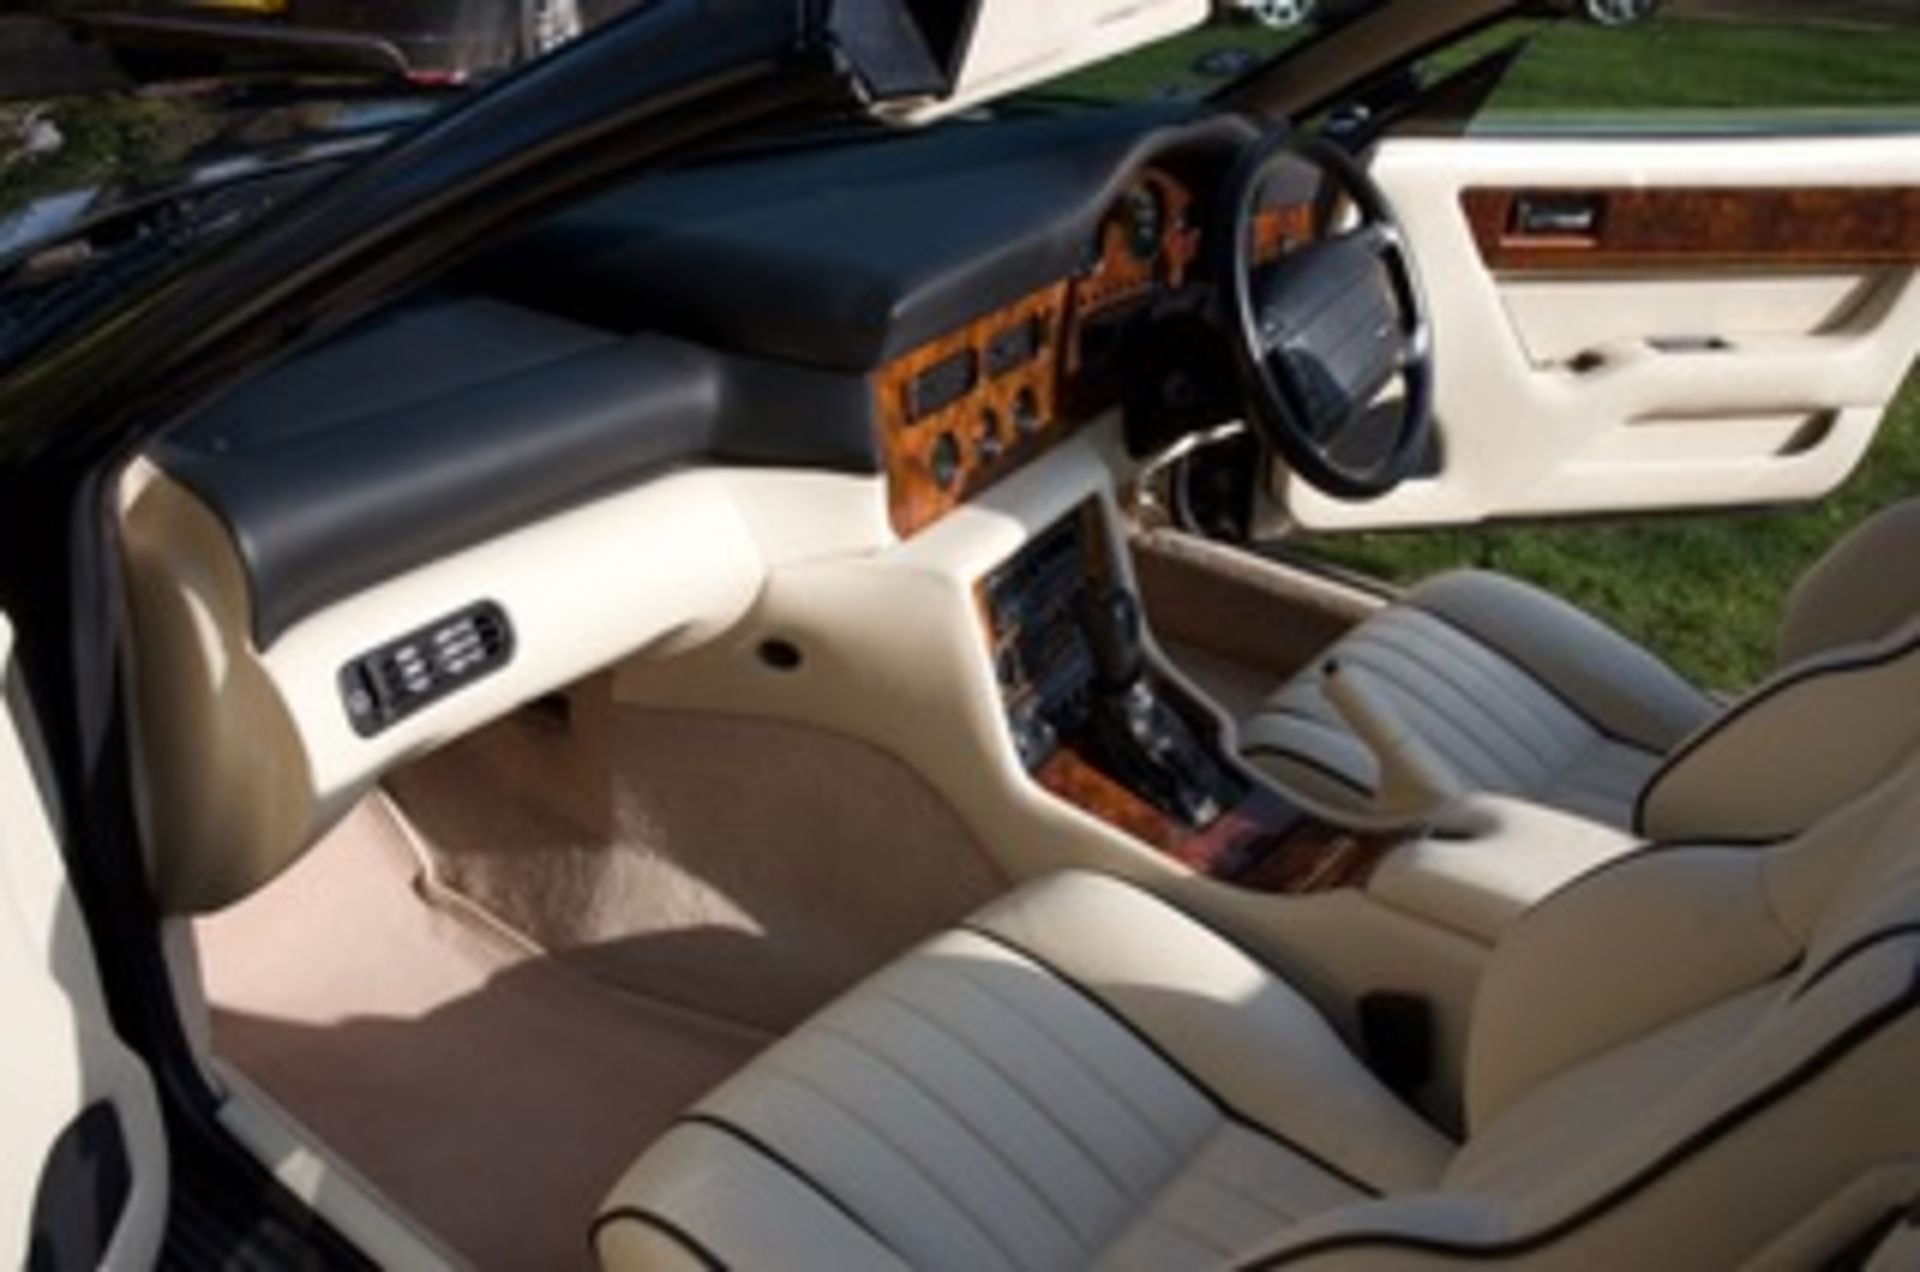 1993 Aston Martin Virage Volante - Having 11 months MOT and aviators number plate H1 AGL - Image 37 of 48